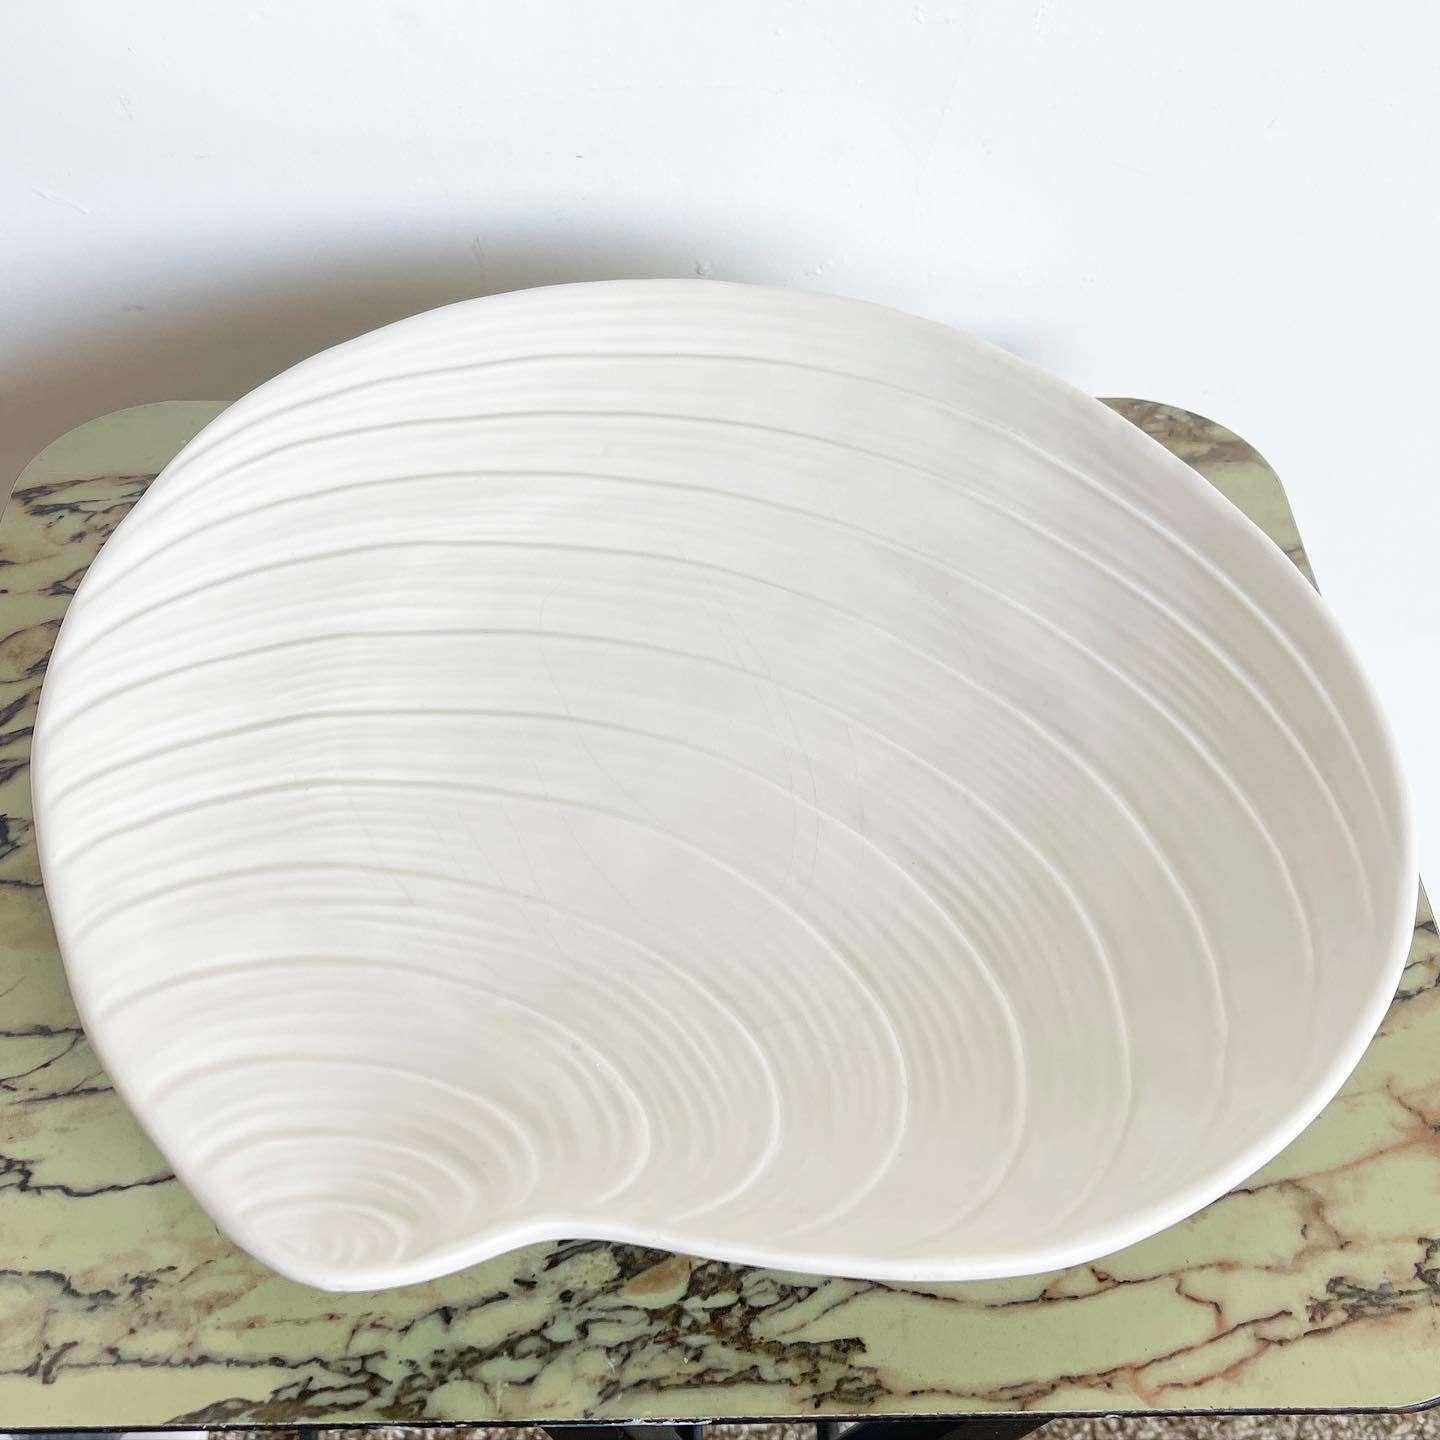 Discover the charm of this wonderful vintage mid-century Italian hand-made platter. Crafted with care, this exquisite piece showcases a glossy off-white finish throughout its surfaces, exuding a timeless elegance and serving as a versatile and